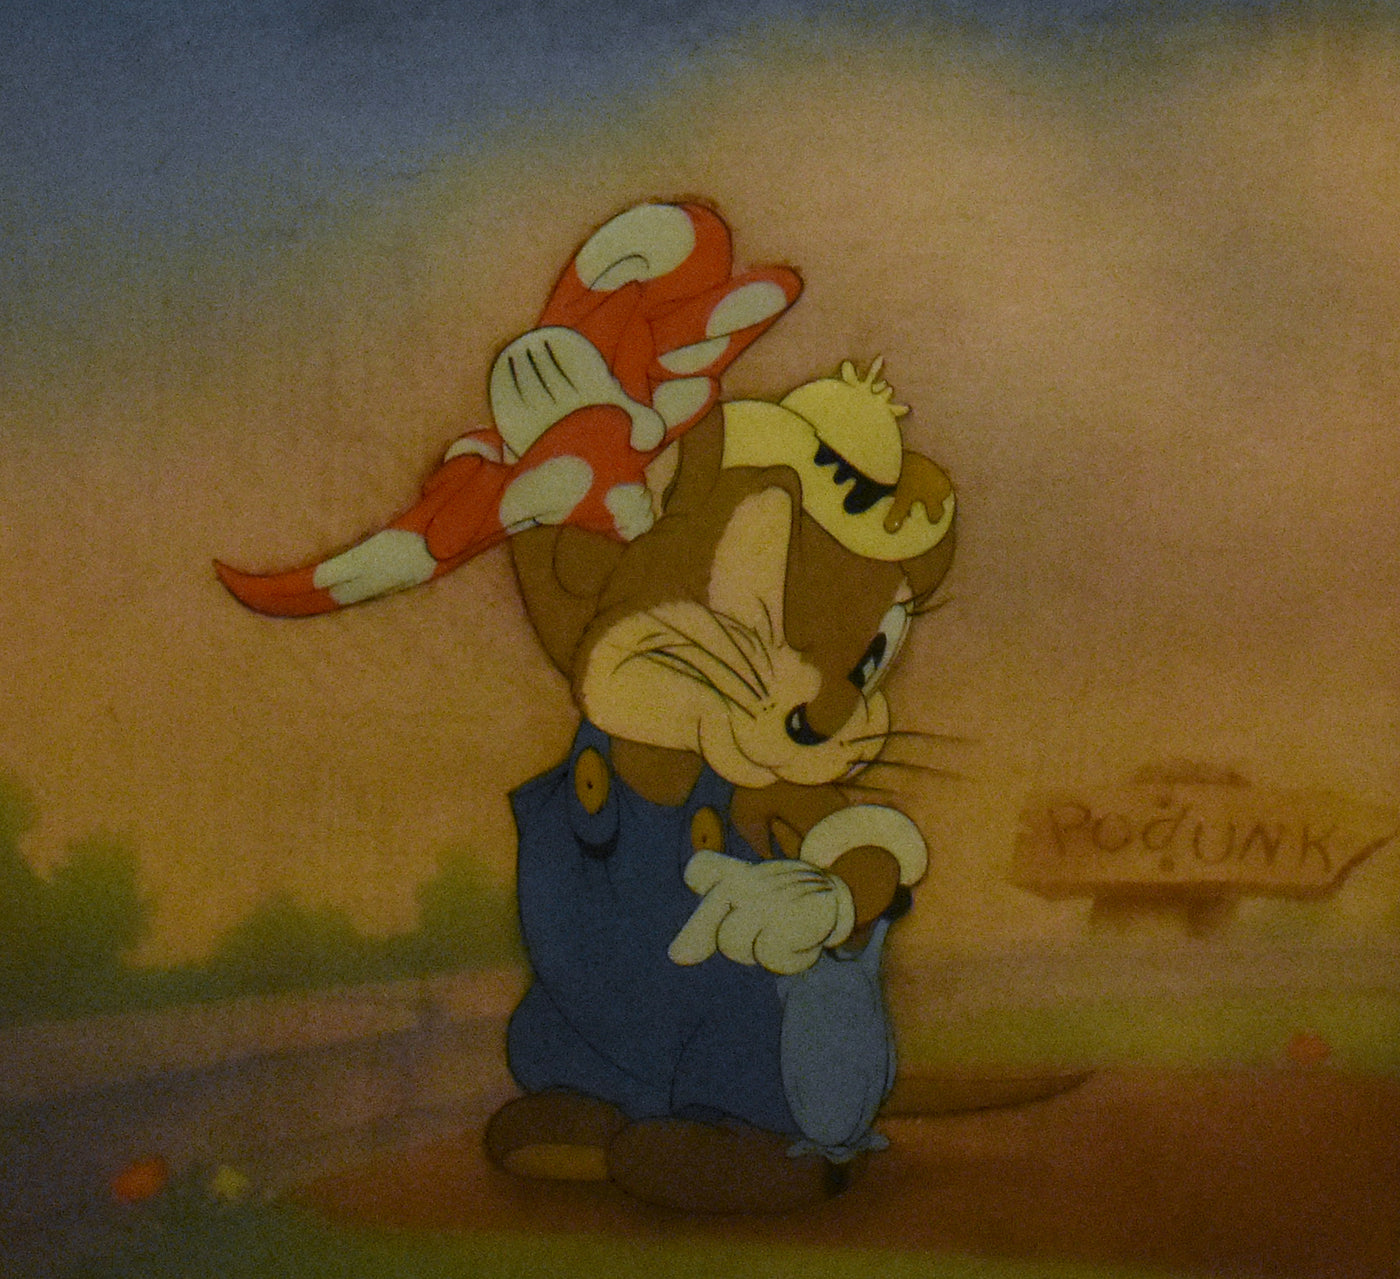 Original Walt Disney Production Cel on Courvoisier Background from The Country Cousin (1936)